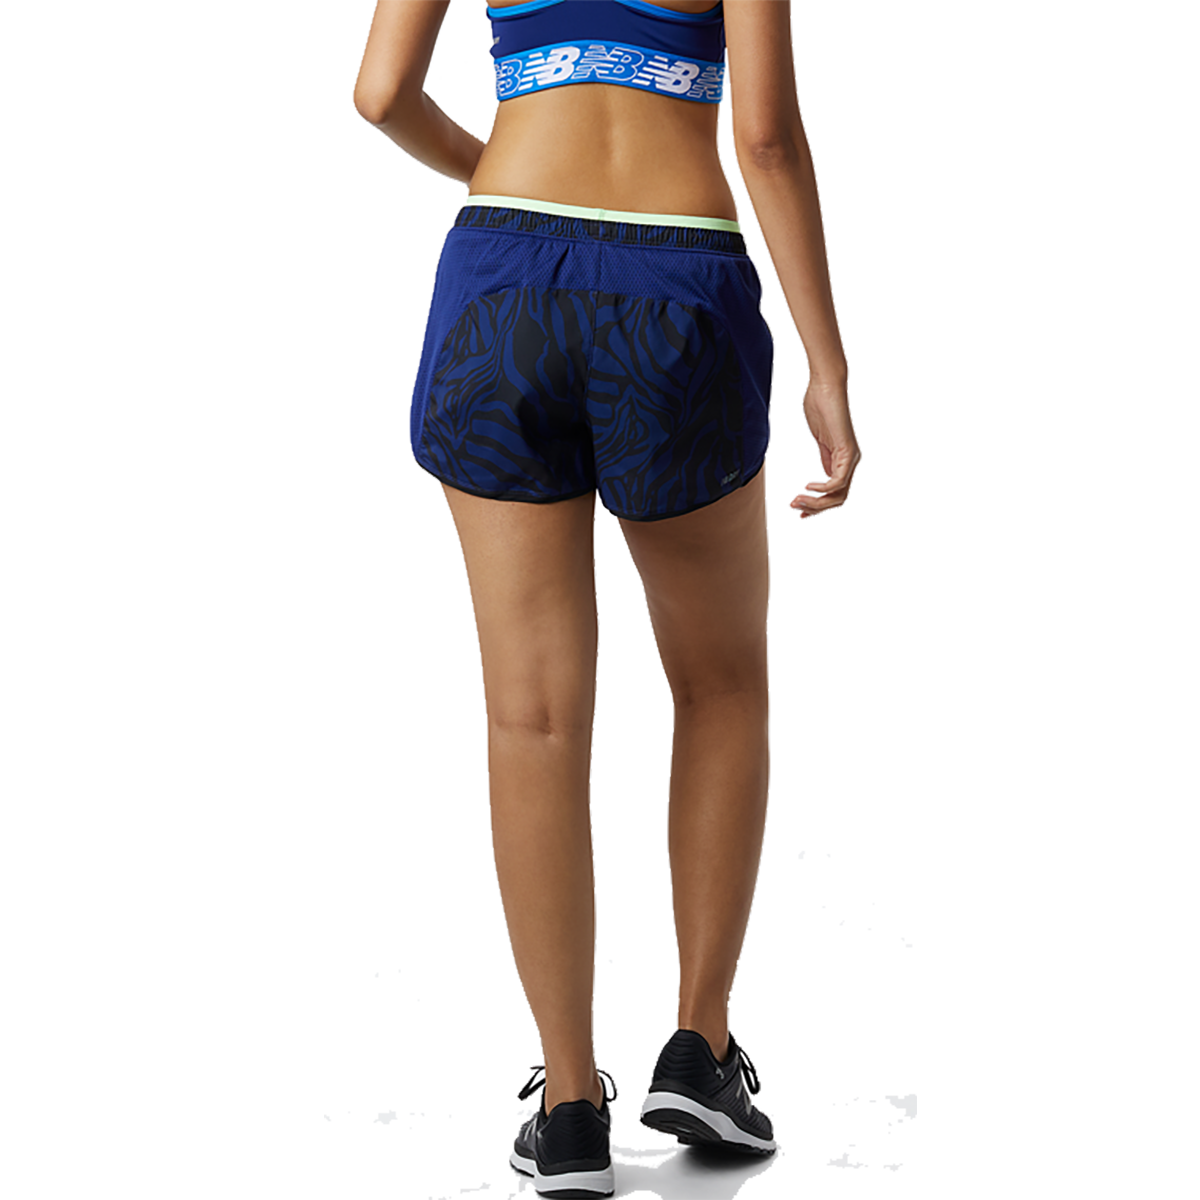 New Balance Printed Fast Flight Short, , large image number null